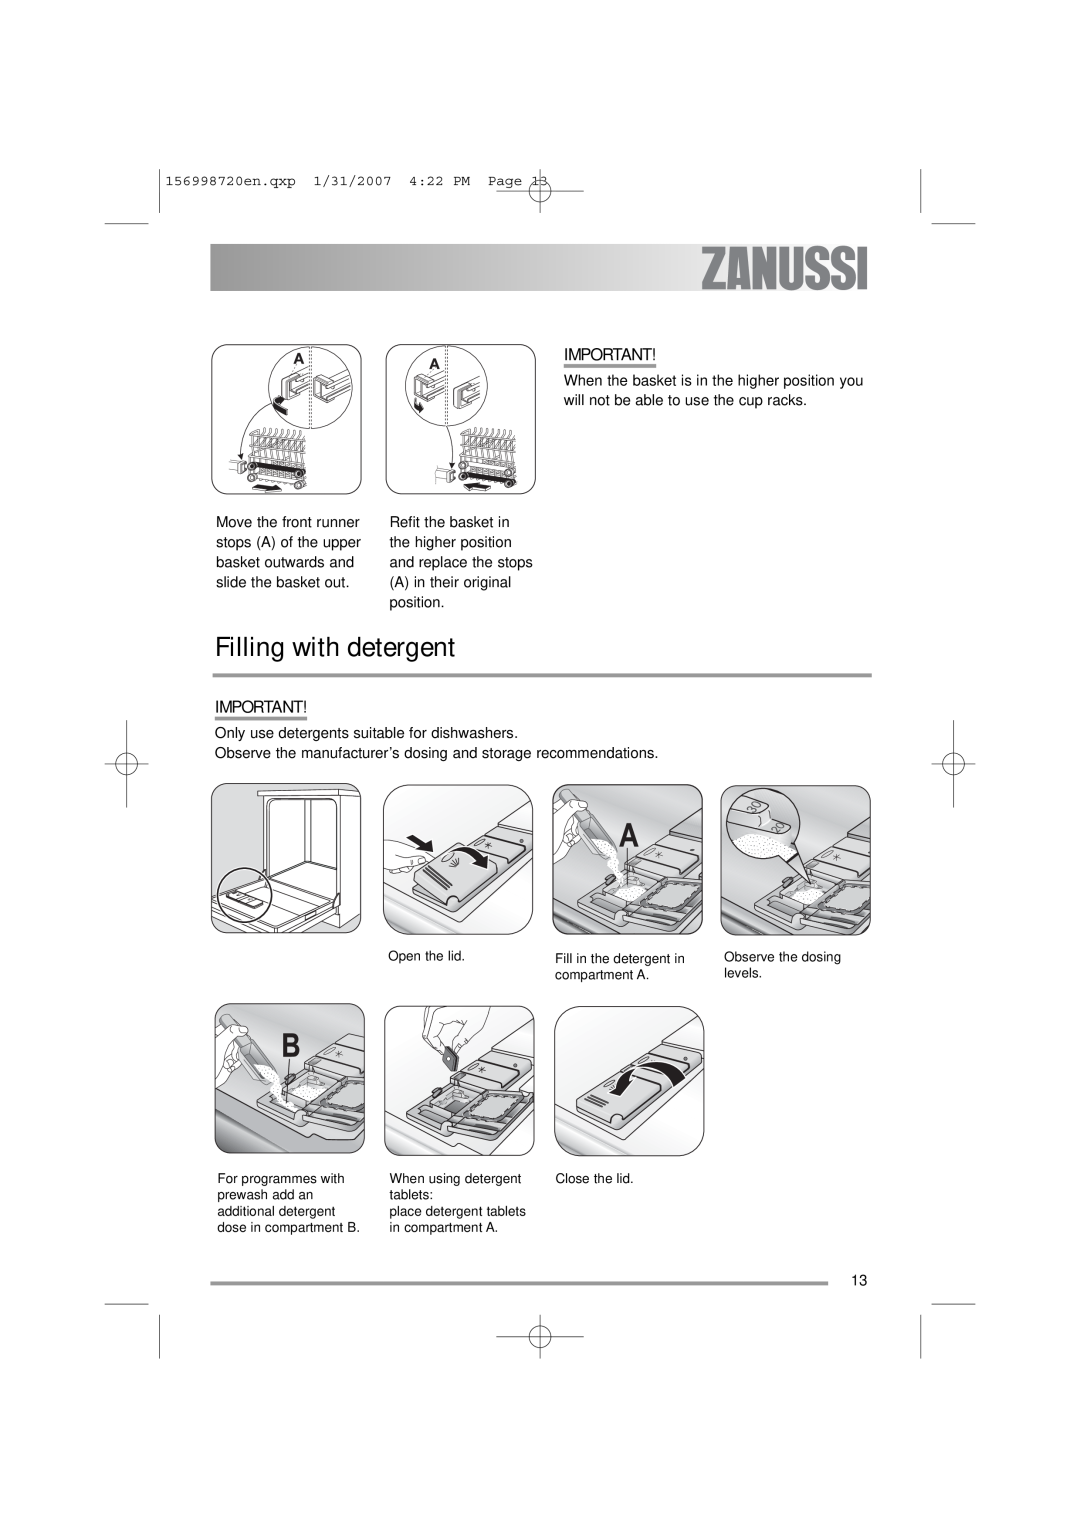 Zanussi ZDI 100 manual Filling with detergent, A in their original position, Only use detergents suitable for dishwashers 